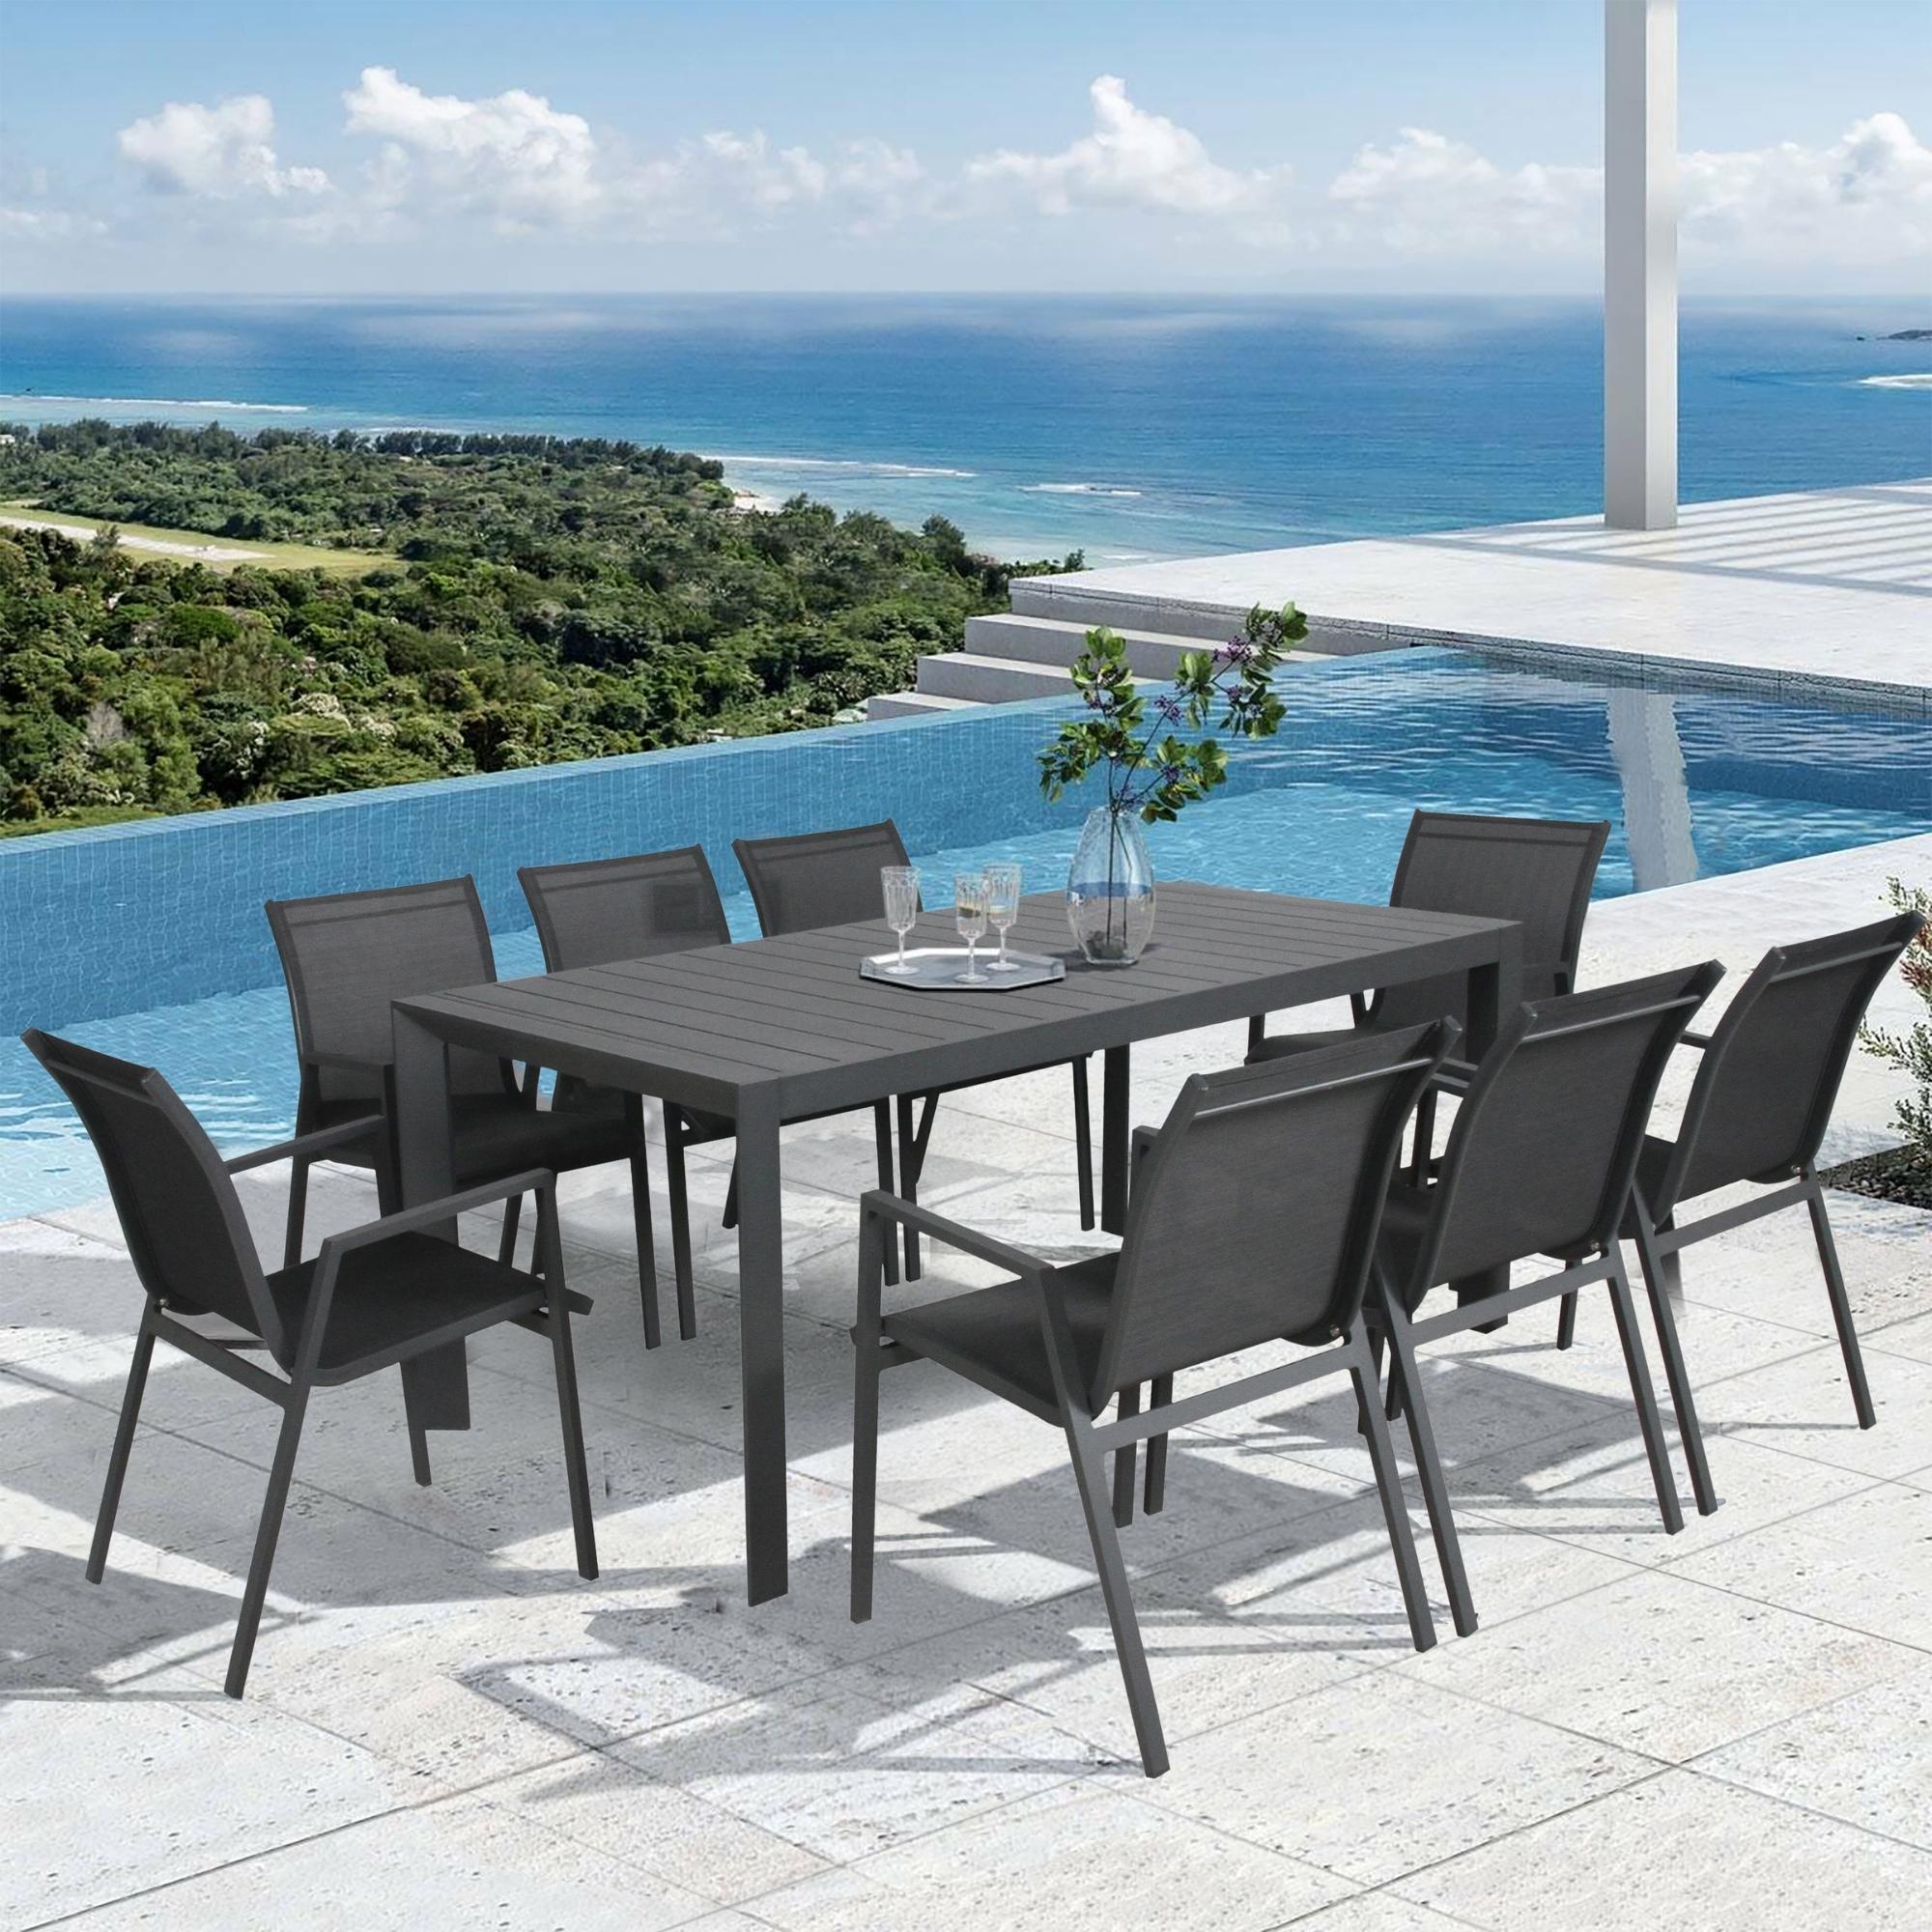 4pc Aluminium Stacking Outdoor Dining Chairs Charcoal